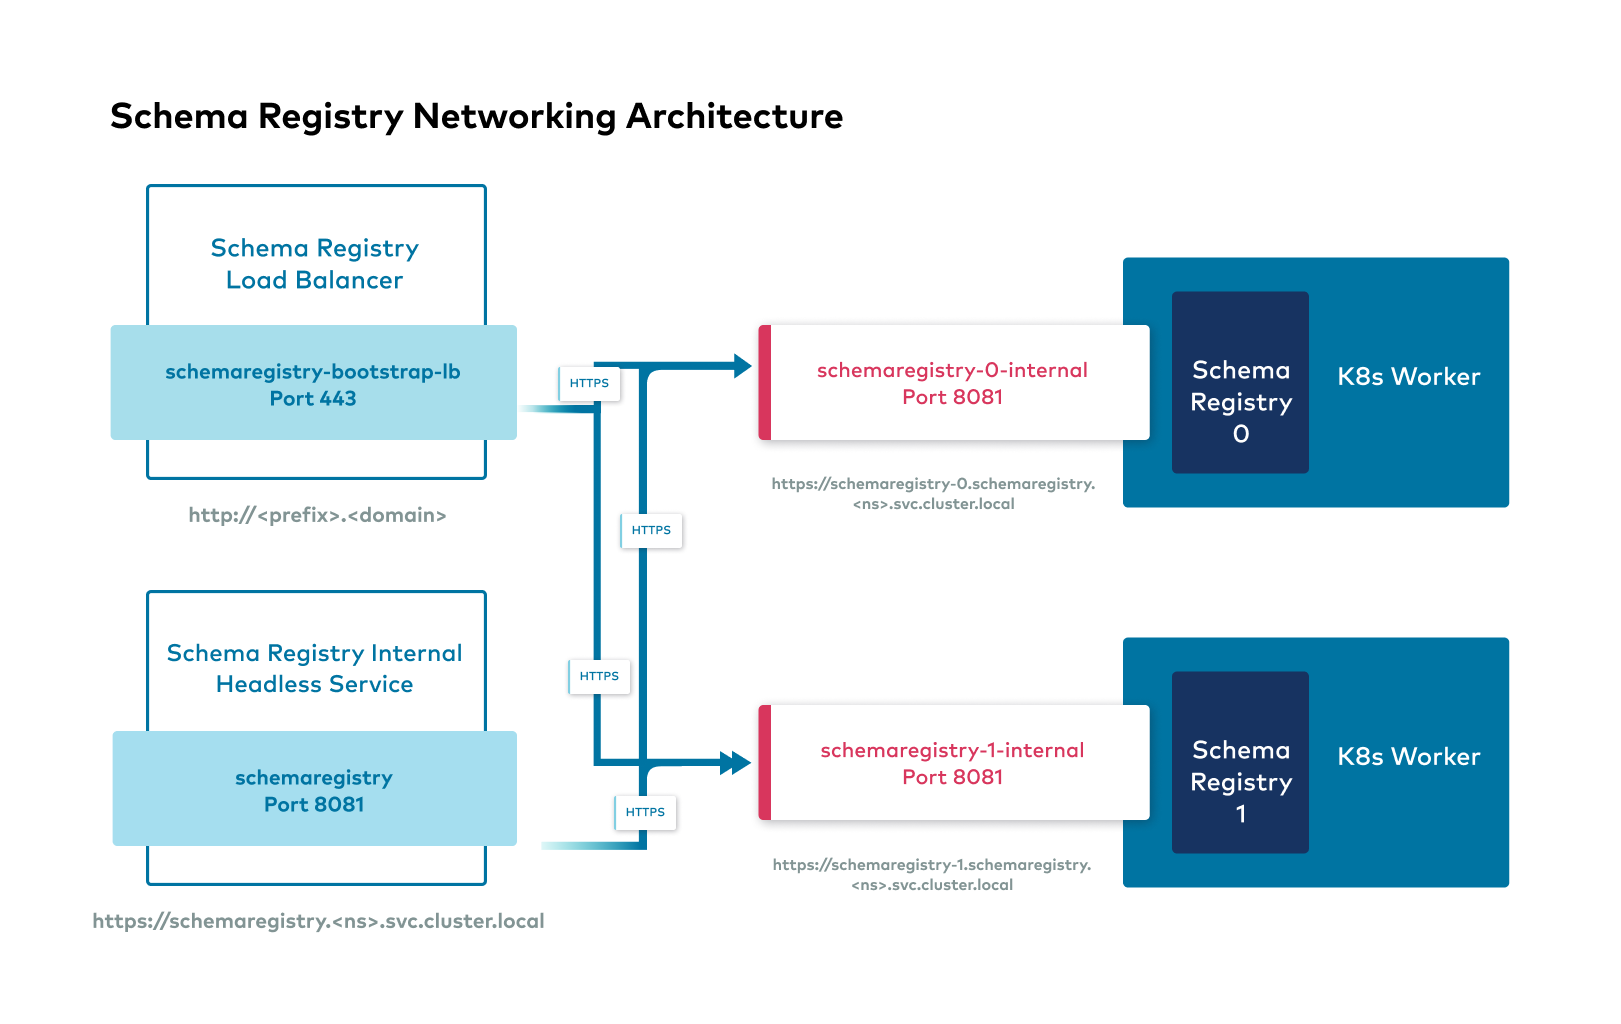 _images/20210428-Schema_Registry_Networking_Architecture.png